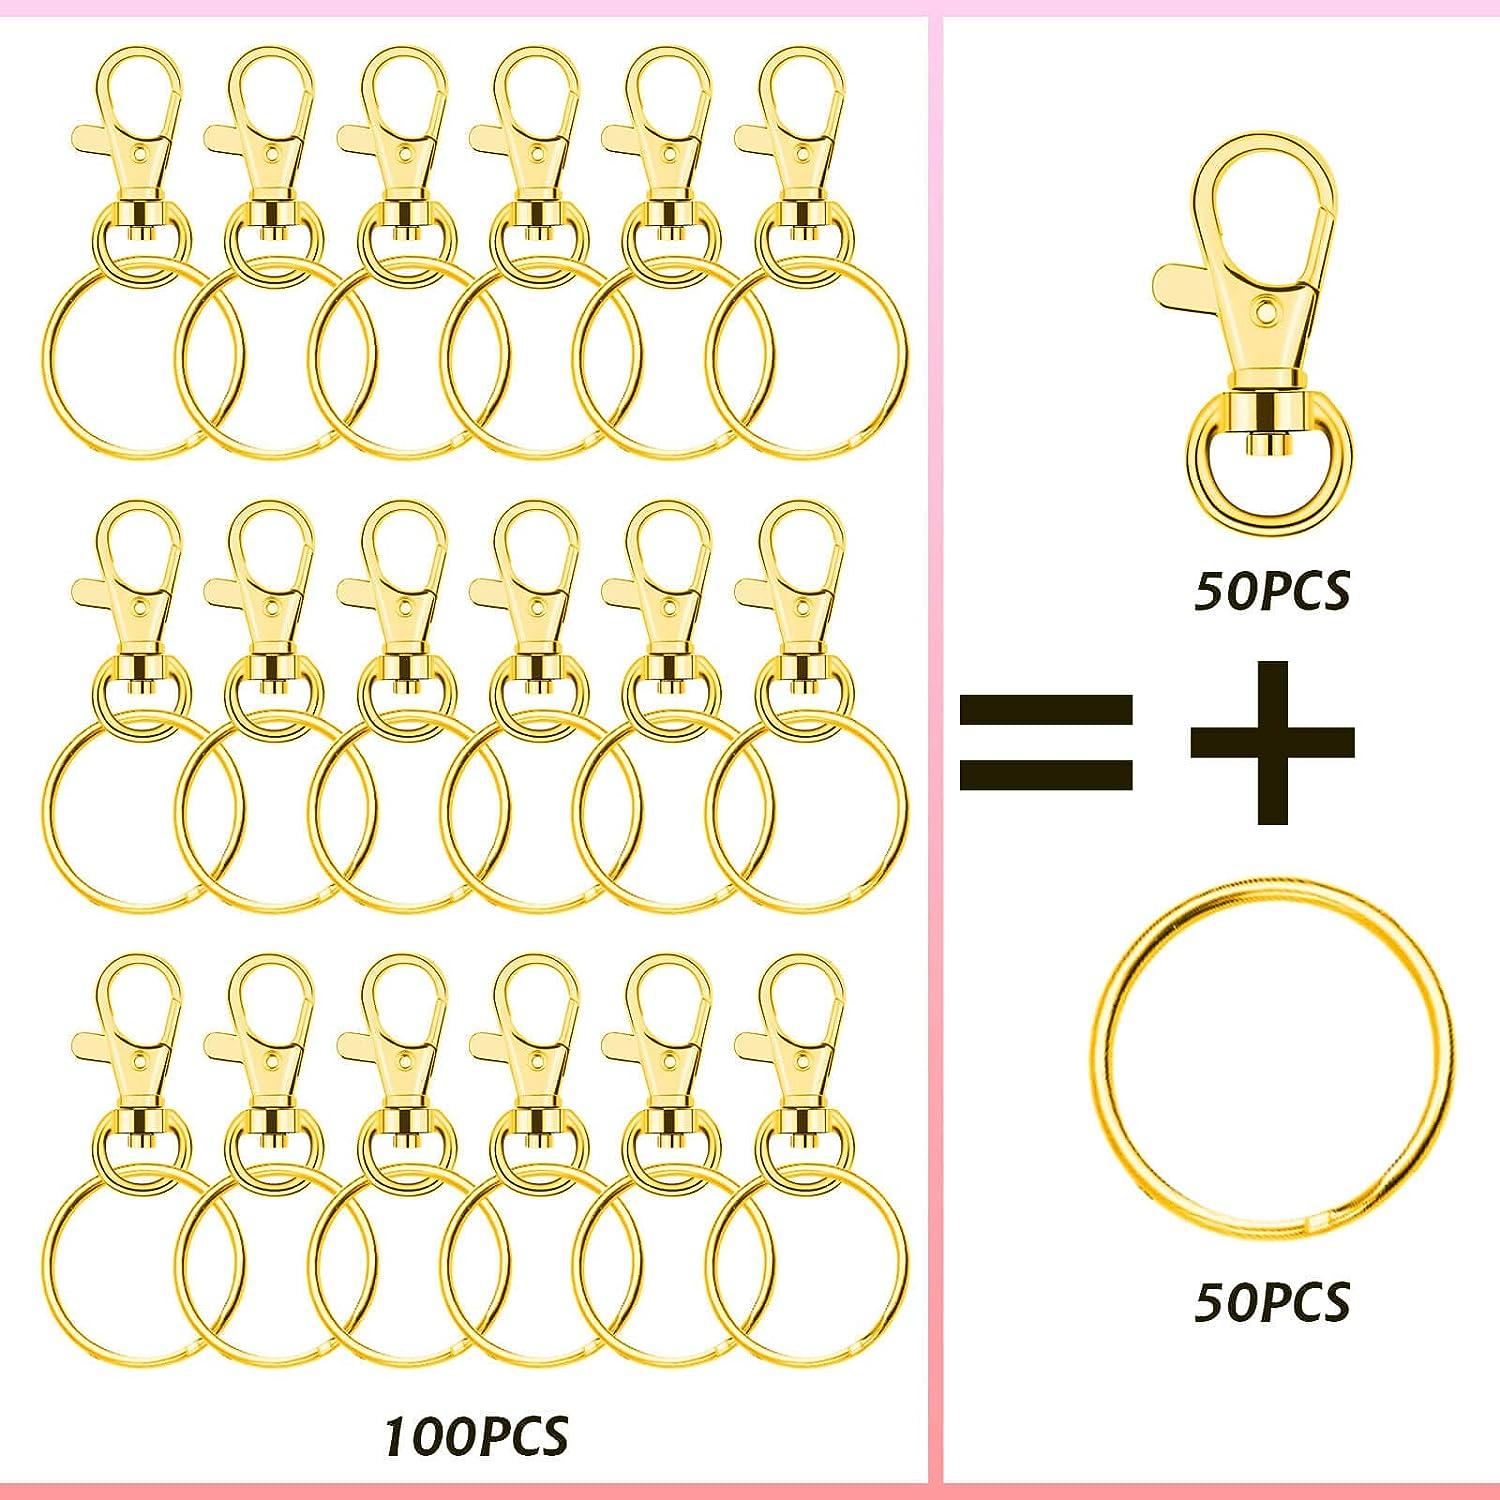 Keychain Making Supplies 50pcs Keychains With Chain And 50 Pcs